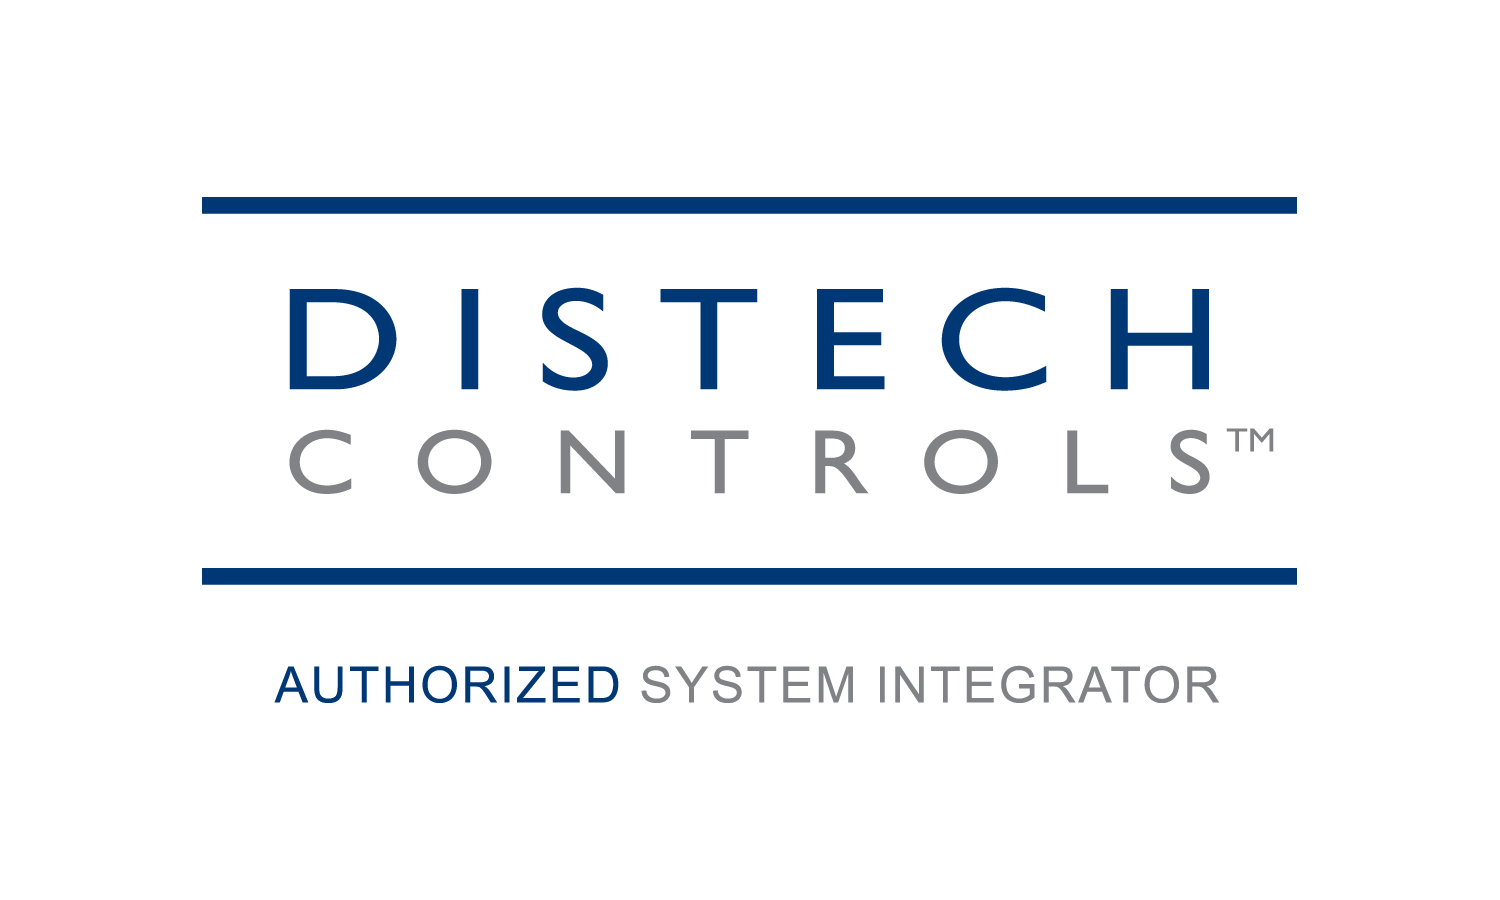 LOGO_AUTHORIZED_SYS_INT_DISTECH_CONTROLS